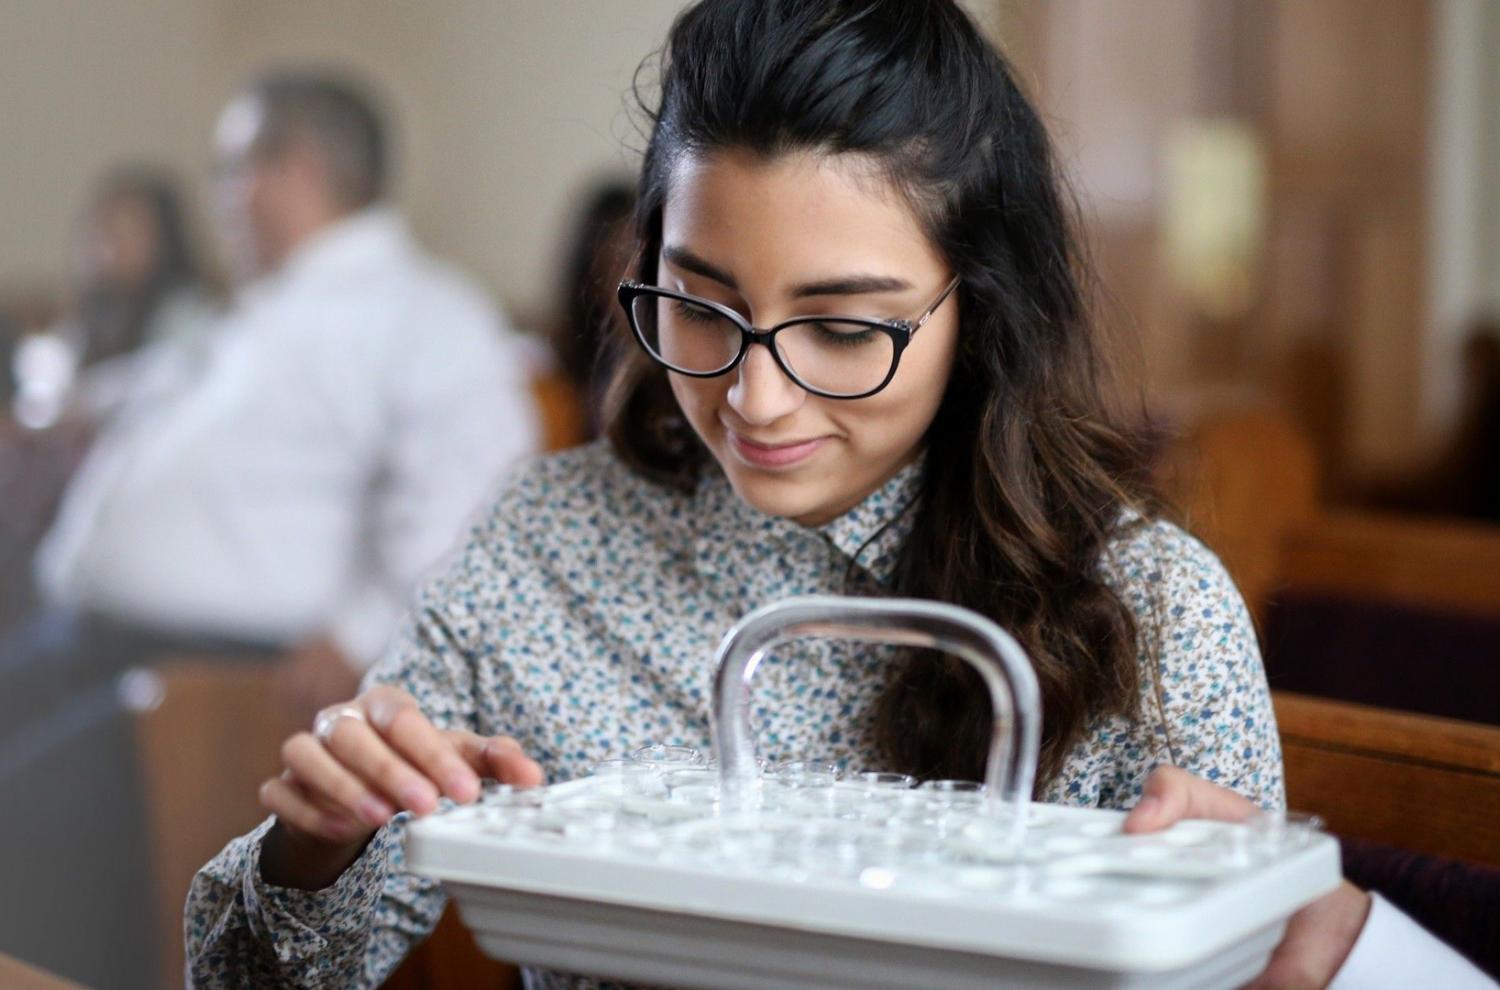 A young woman takes a cup of water from the tray during the Sacrament ordinance. Image courtesy of The Church of Jesus Christ of Latter-day Saints.